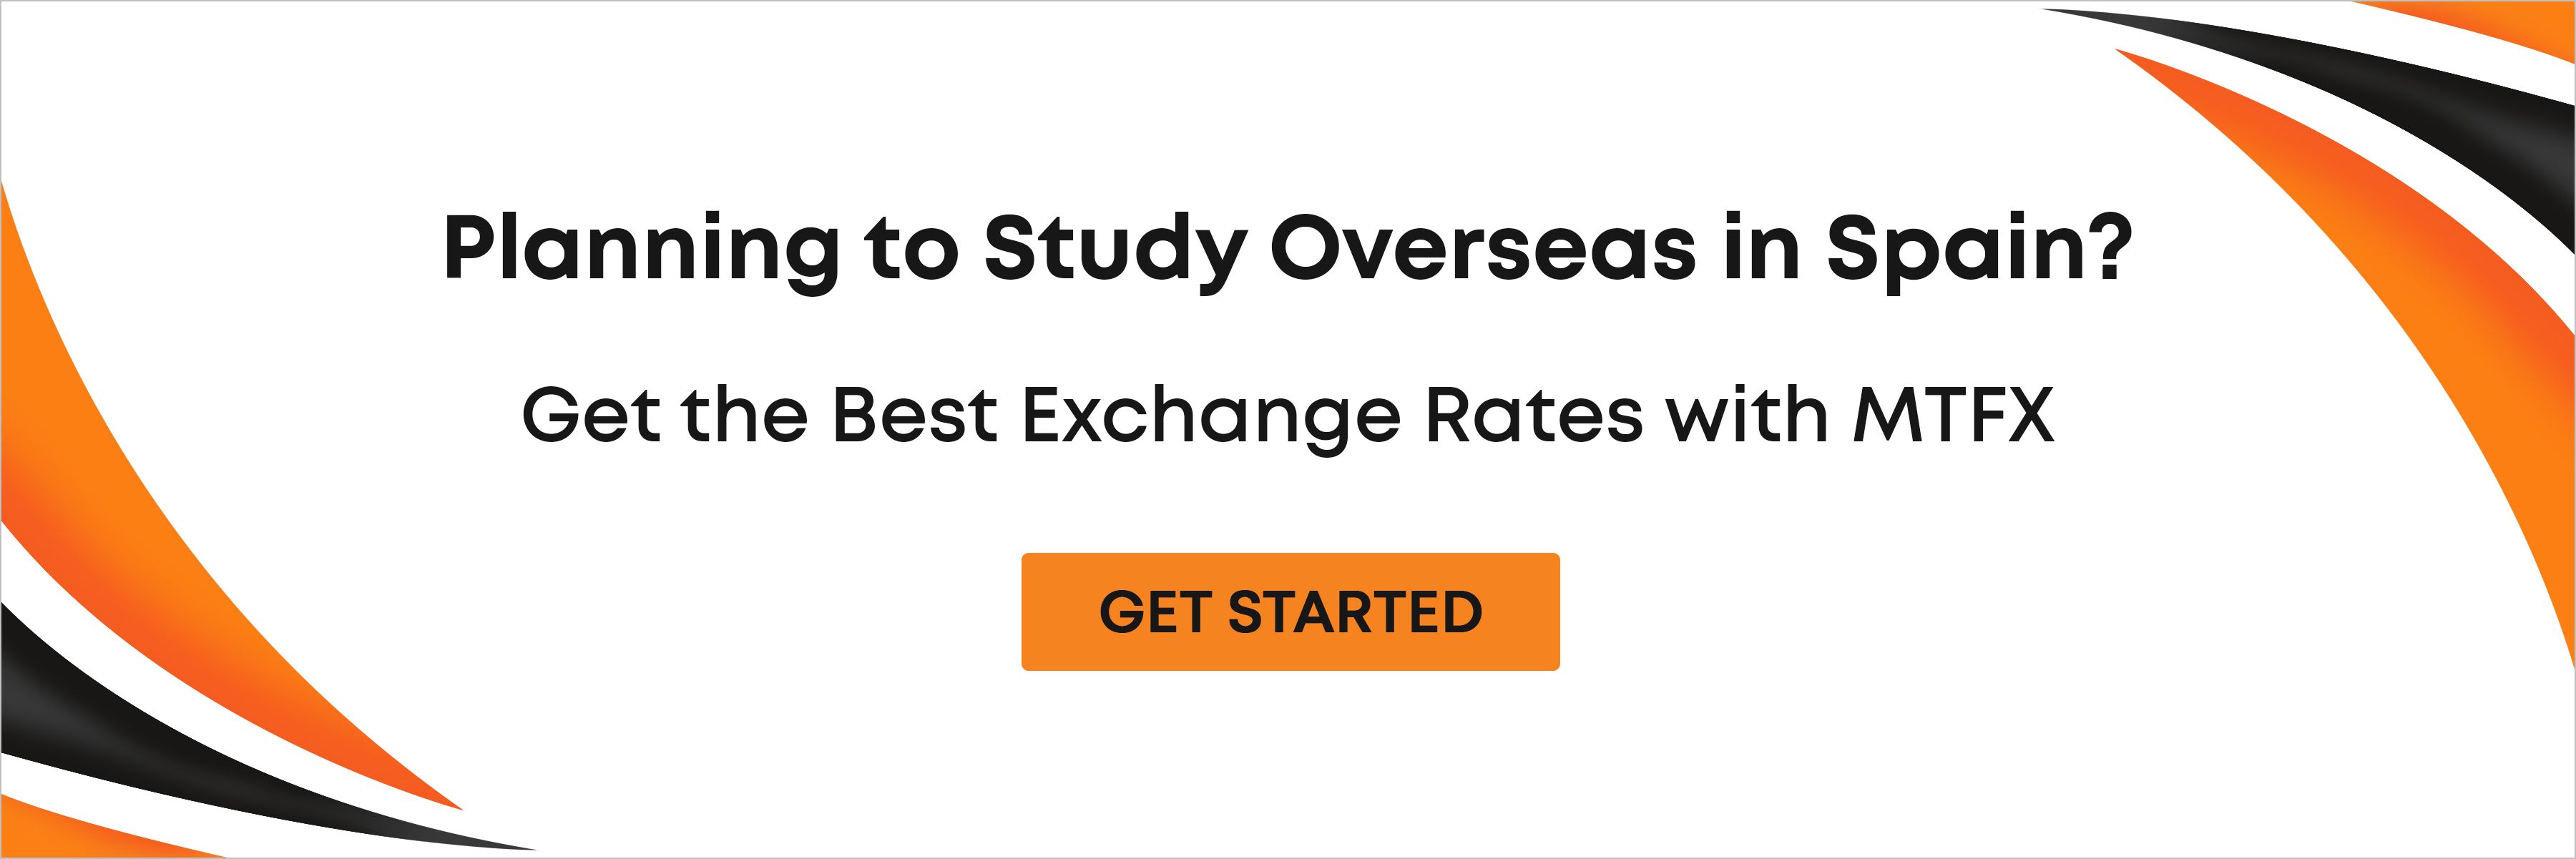 Register Online with MTFX to Get The Best Exchange Rate While Studying In Spain